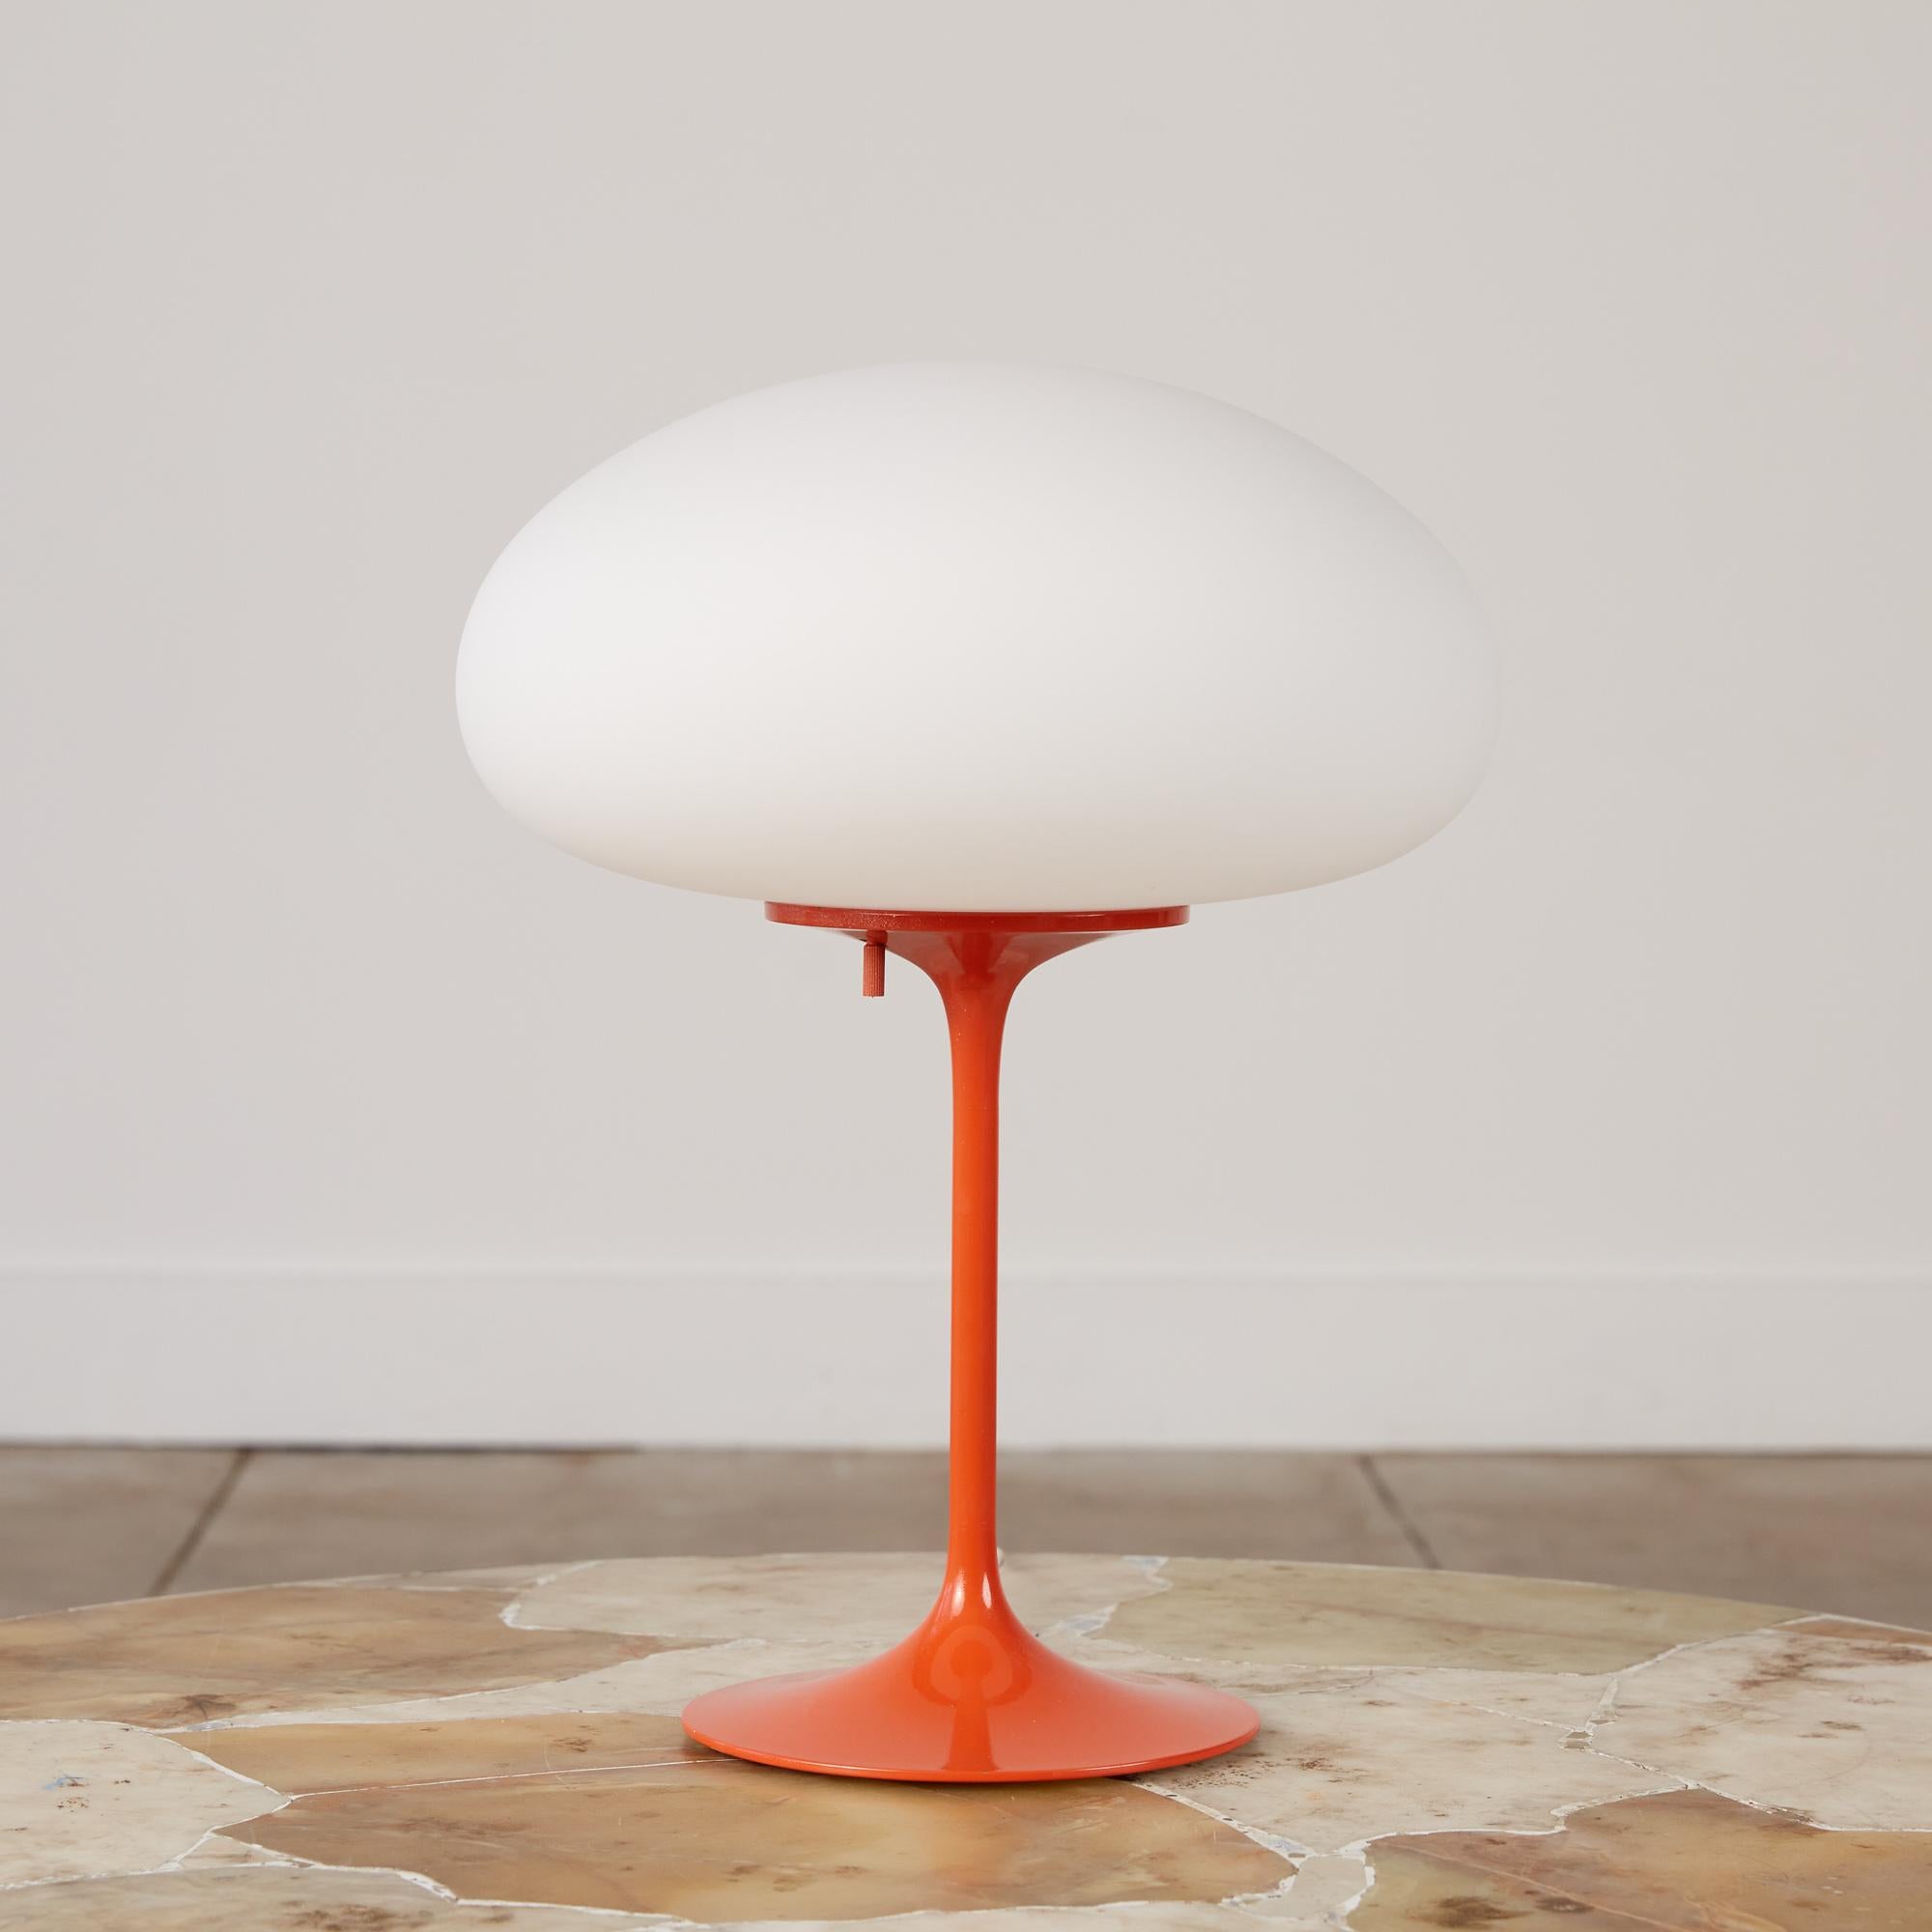 Bill Curry “Mushroom” table lamp for Design Line, USA, c.1960s The lamp features an orange enamel stem and tulip base which supports a frosted glass globe that emits a soft glow when lit. The on and off switch is discreetly situated underneath for